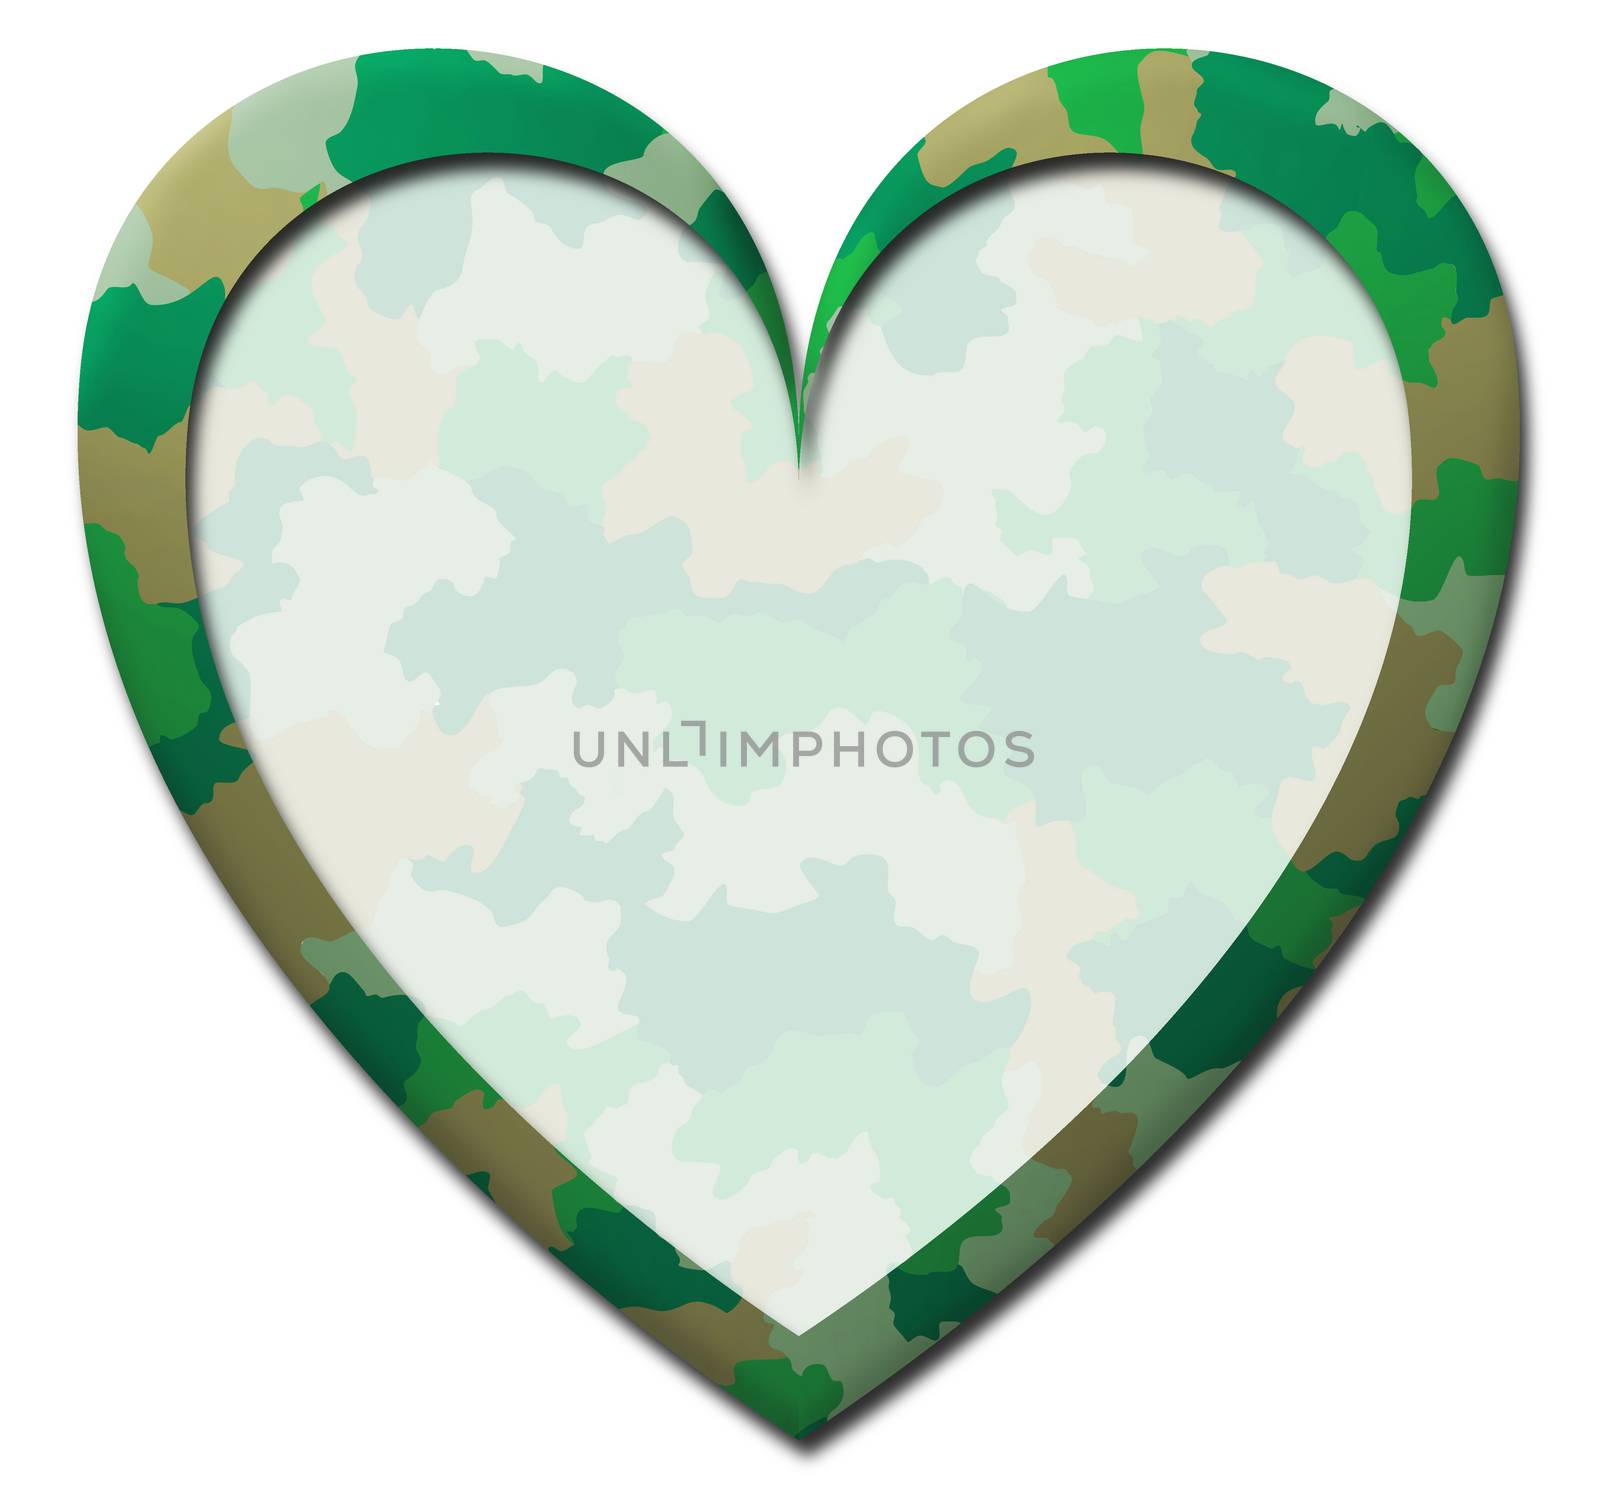 Green camouflage military heart